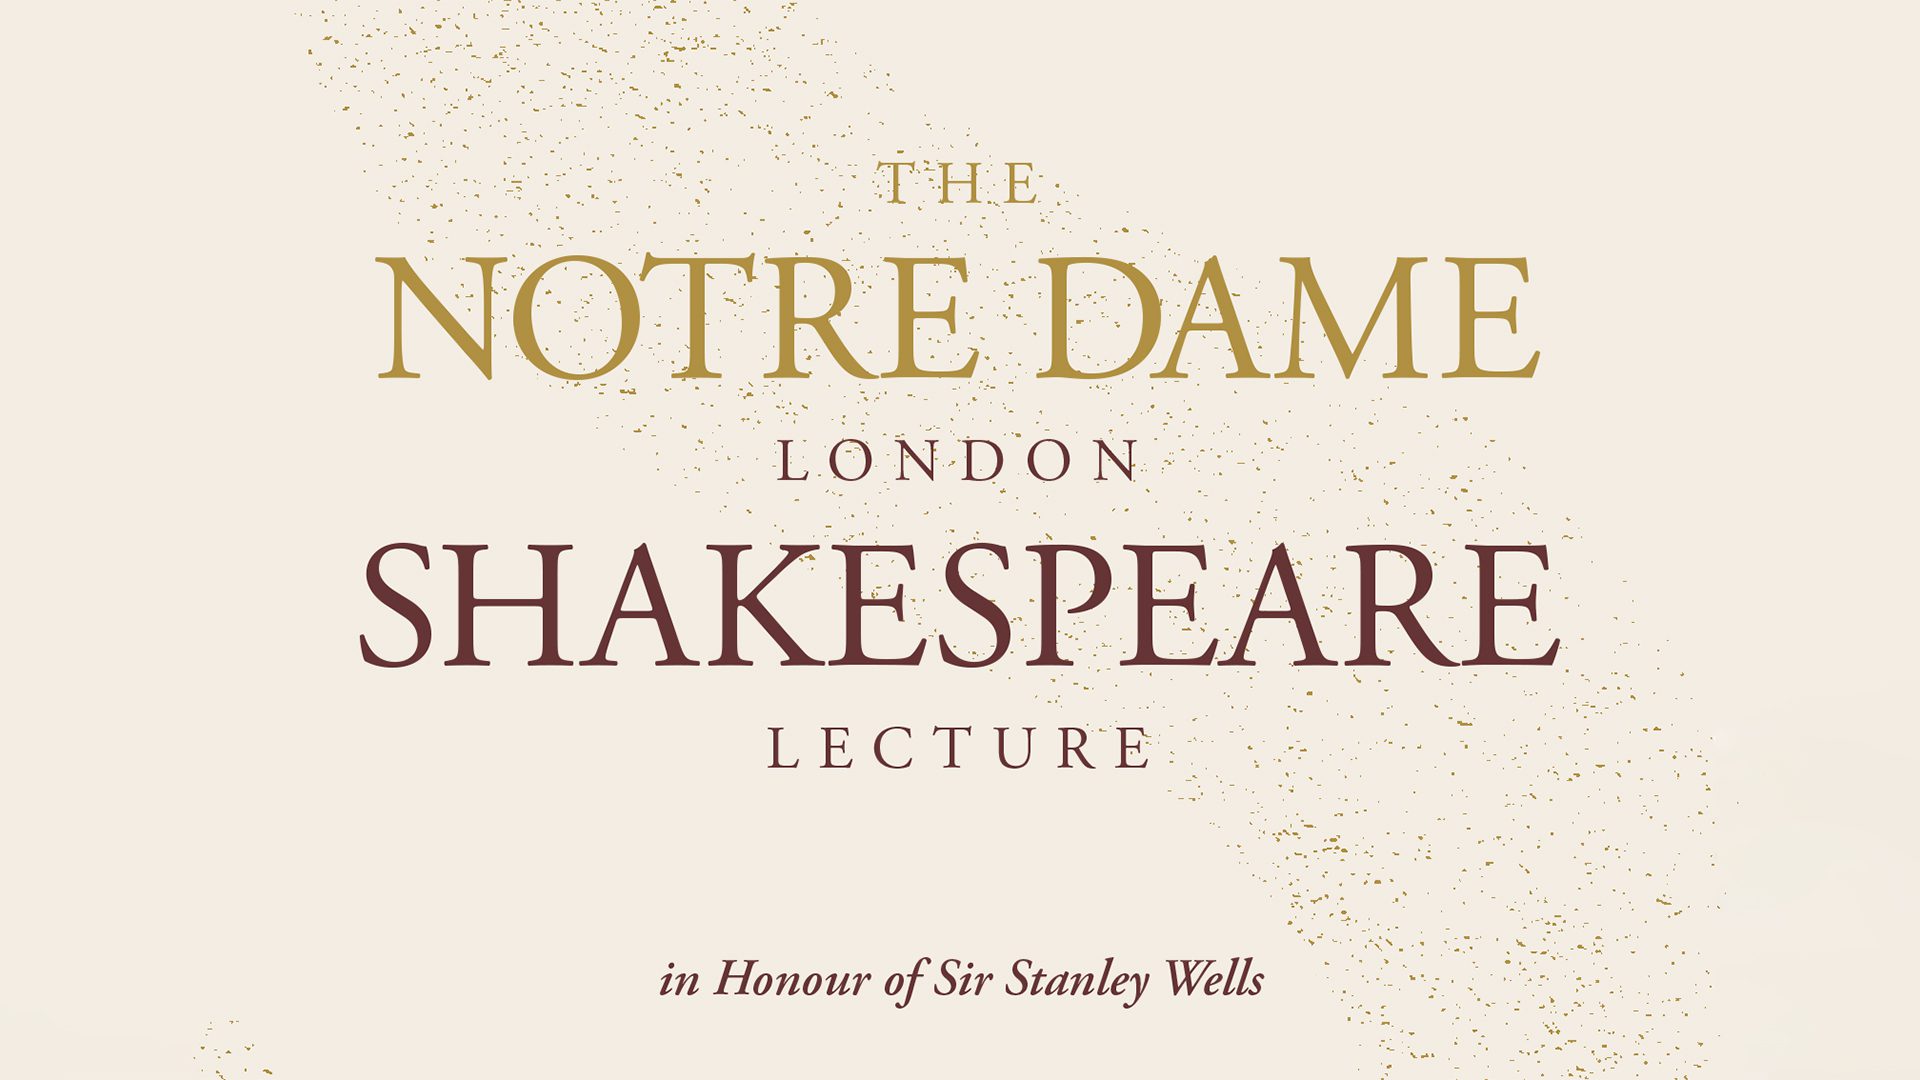 The Notre Dame London Shakespeare Lecture with Prof. Carol Rutter